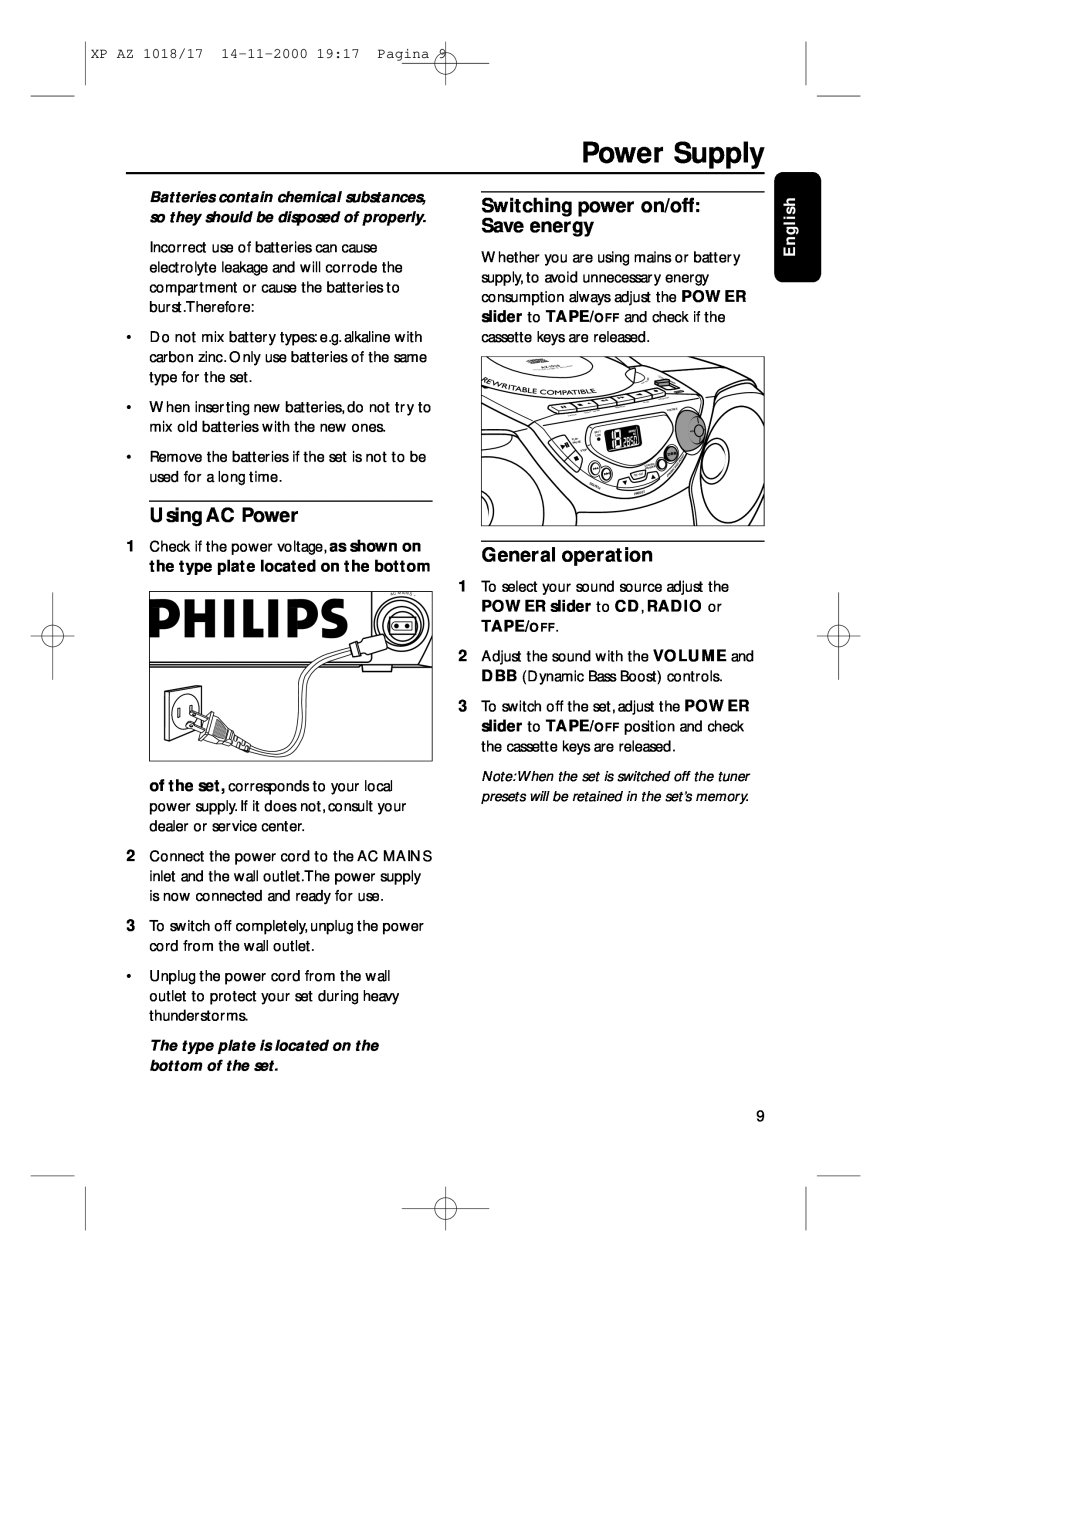 Philips 1018 manual Power Supply, Using AC Power, Switching power on/off Save energy, General operation, English 